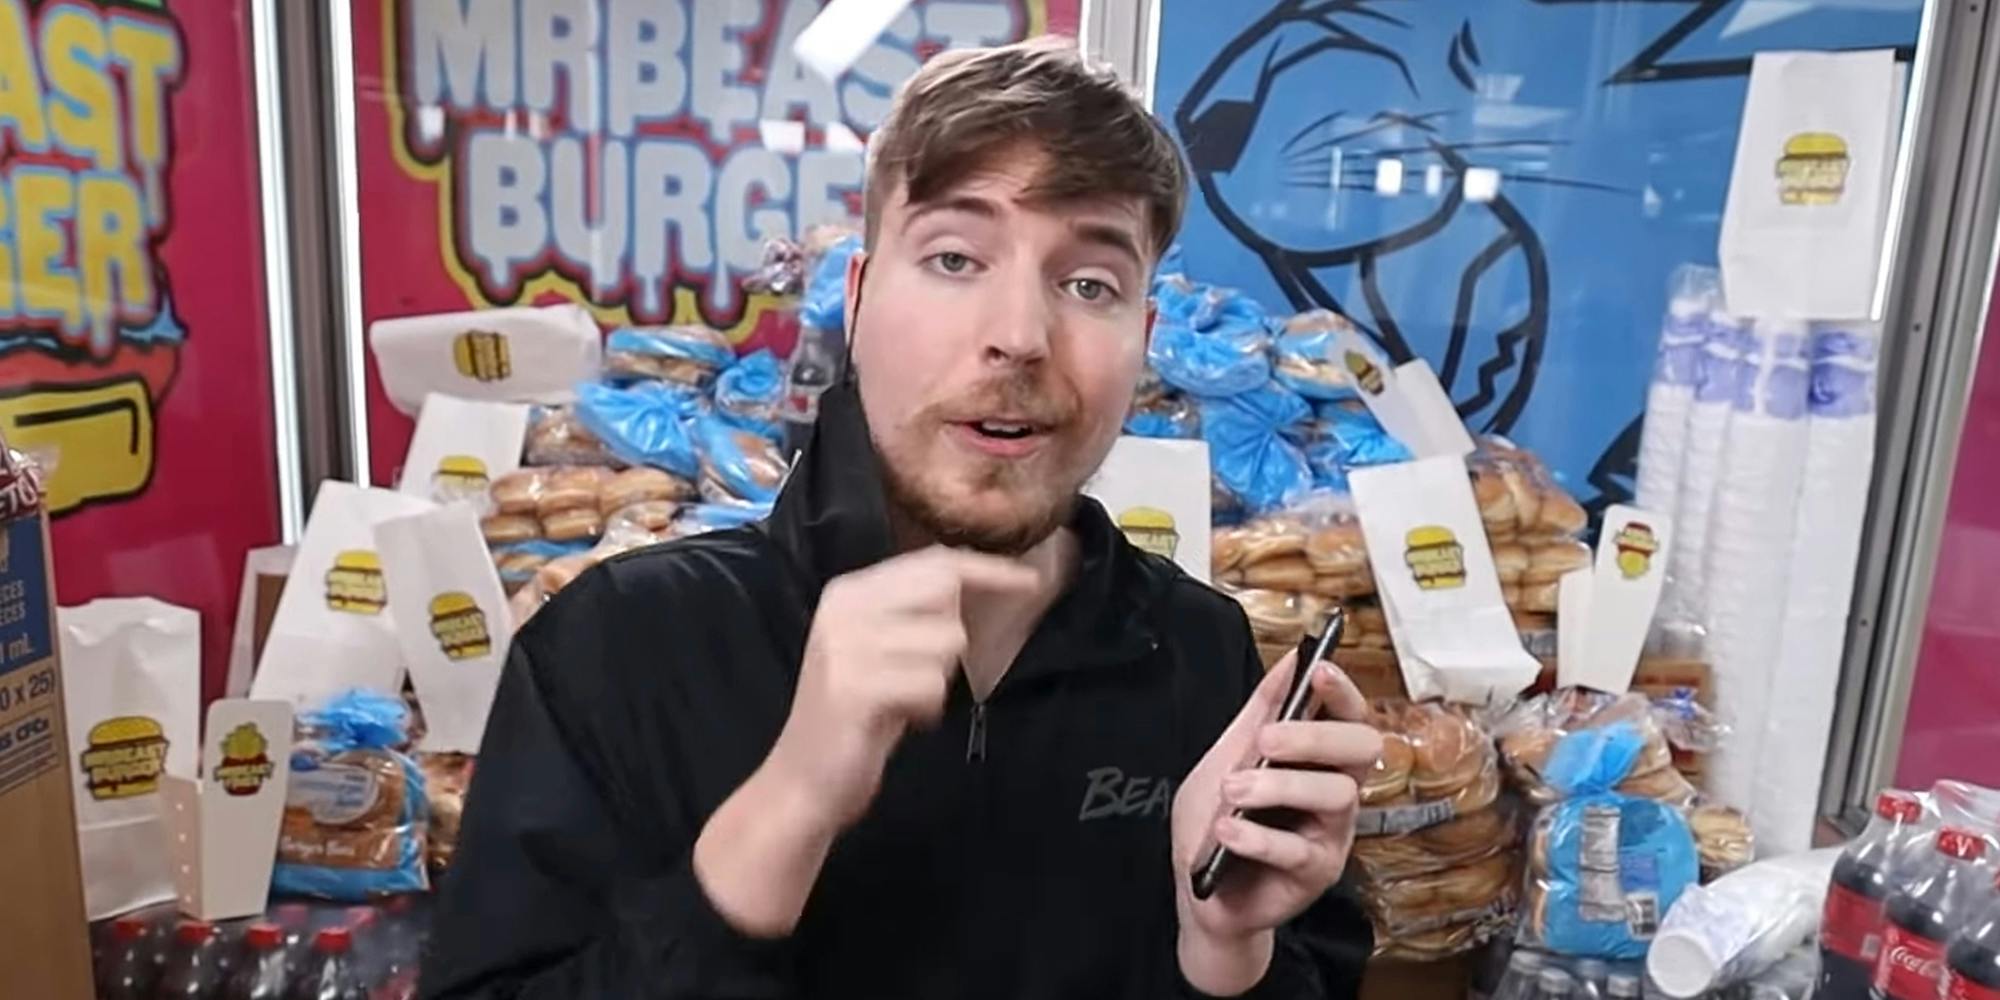 What MrBeast burger taught me about ghost kitchens - Produce Blue Book